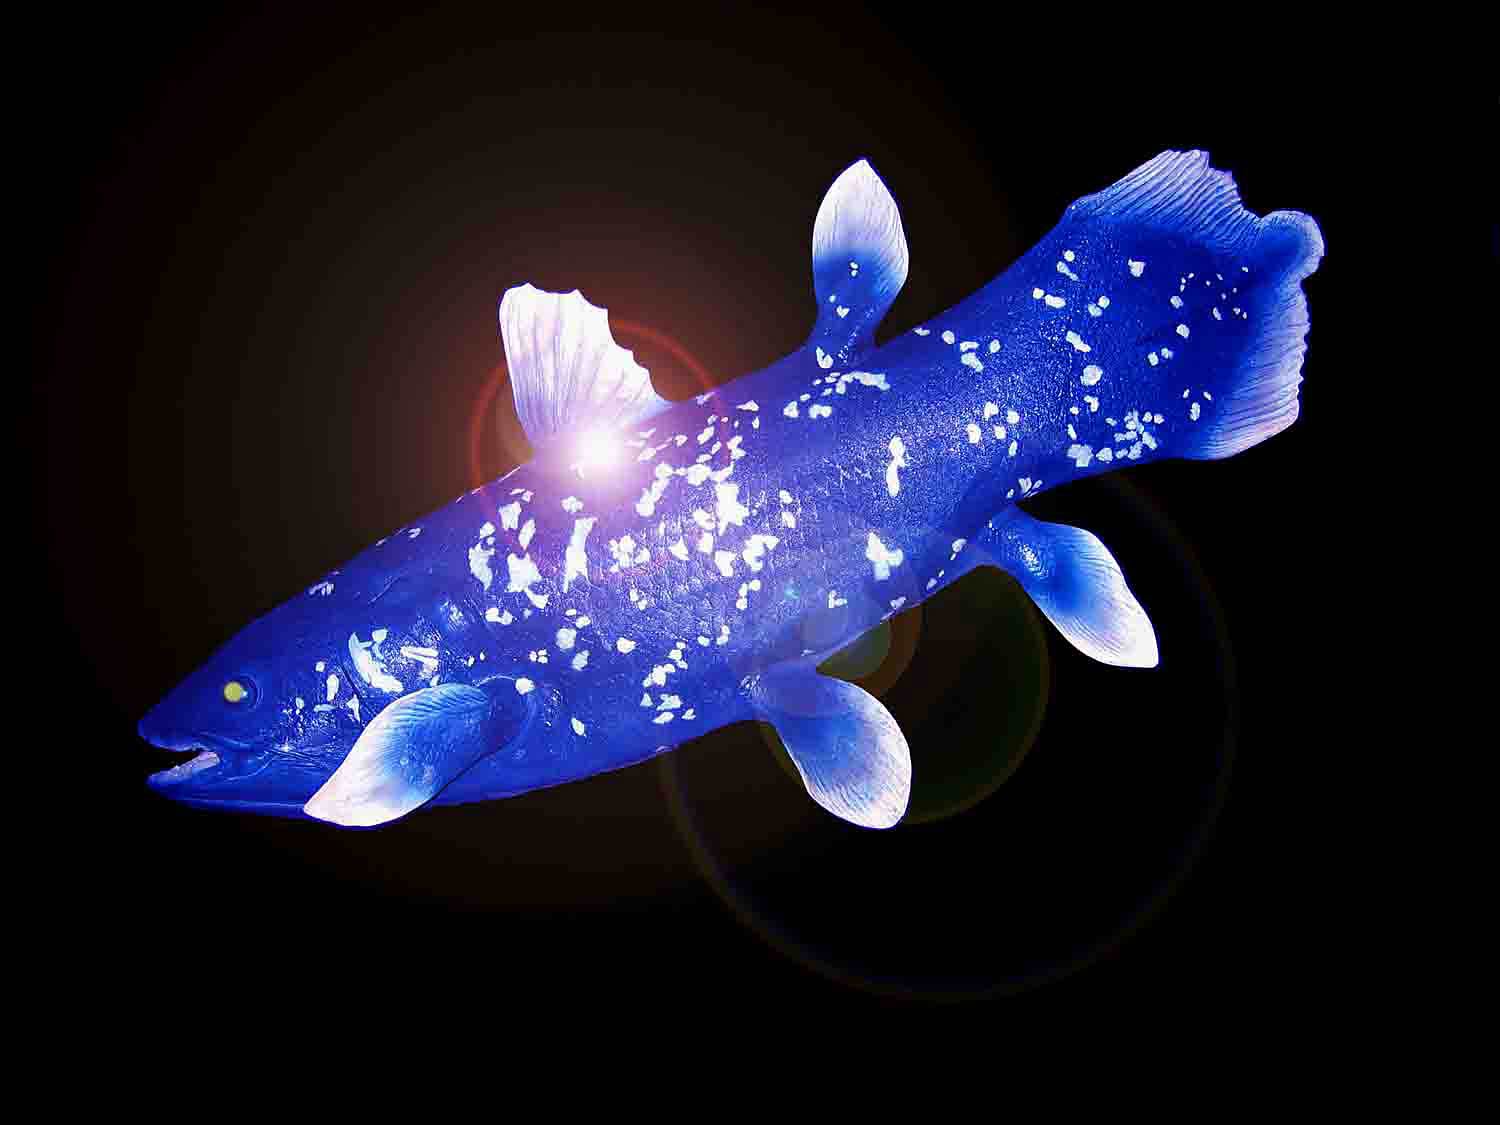 free Coelacanth wallpaper wallpapers and background